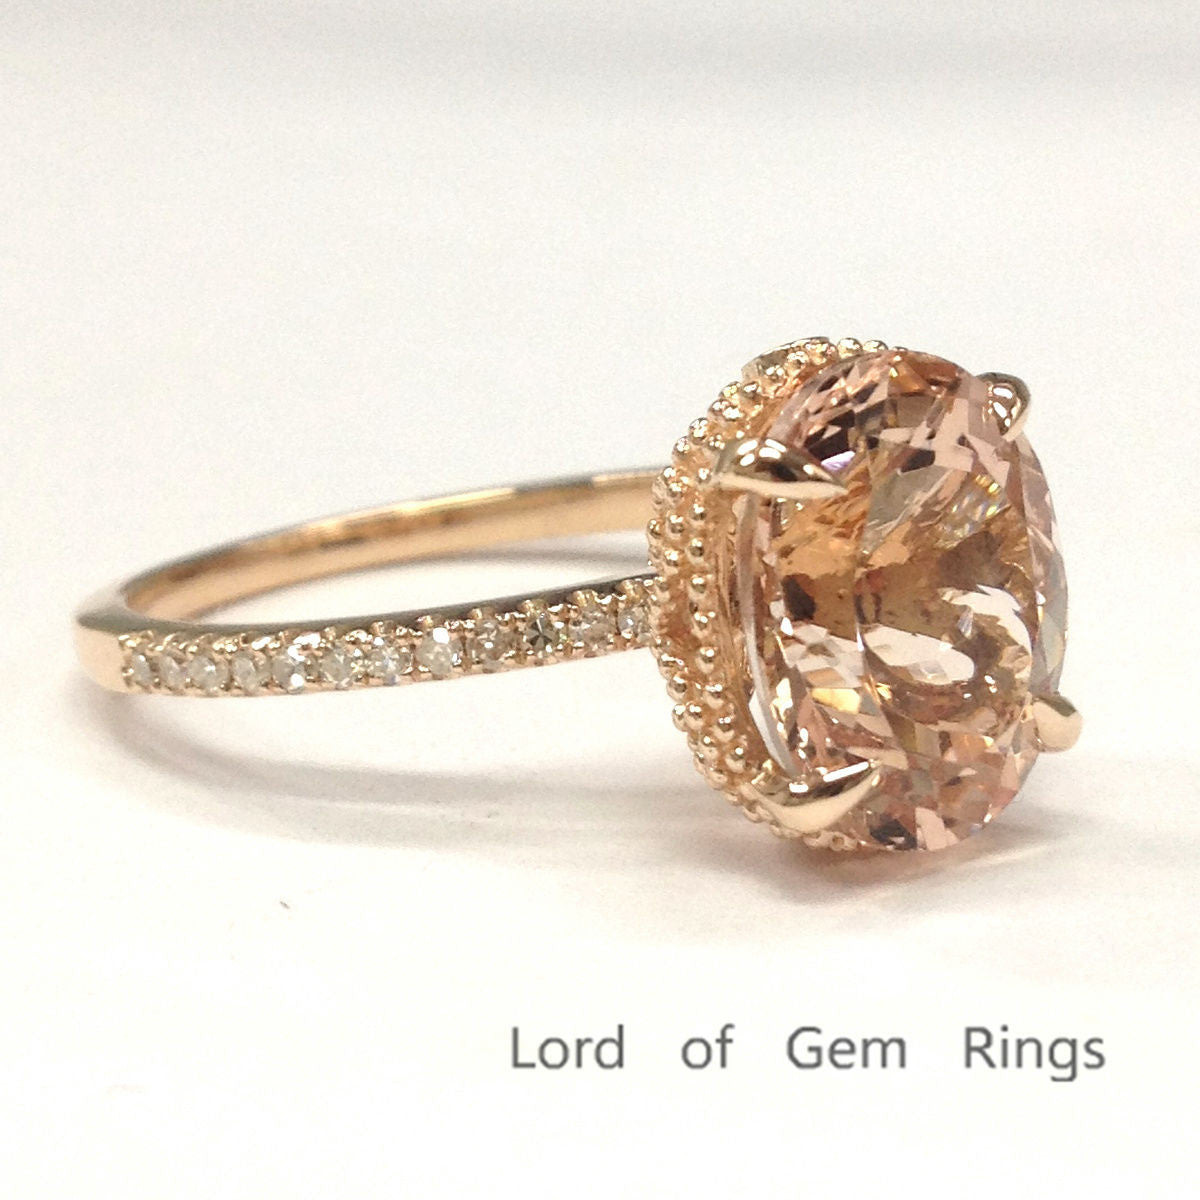 Reserved for Judi, Oval Pink Morganite Engagement Ring Pave Diamond 14K Rose Gold - Lord of Gem Rings - 6